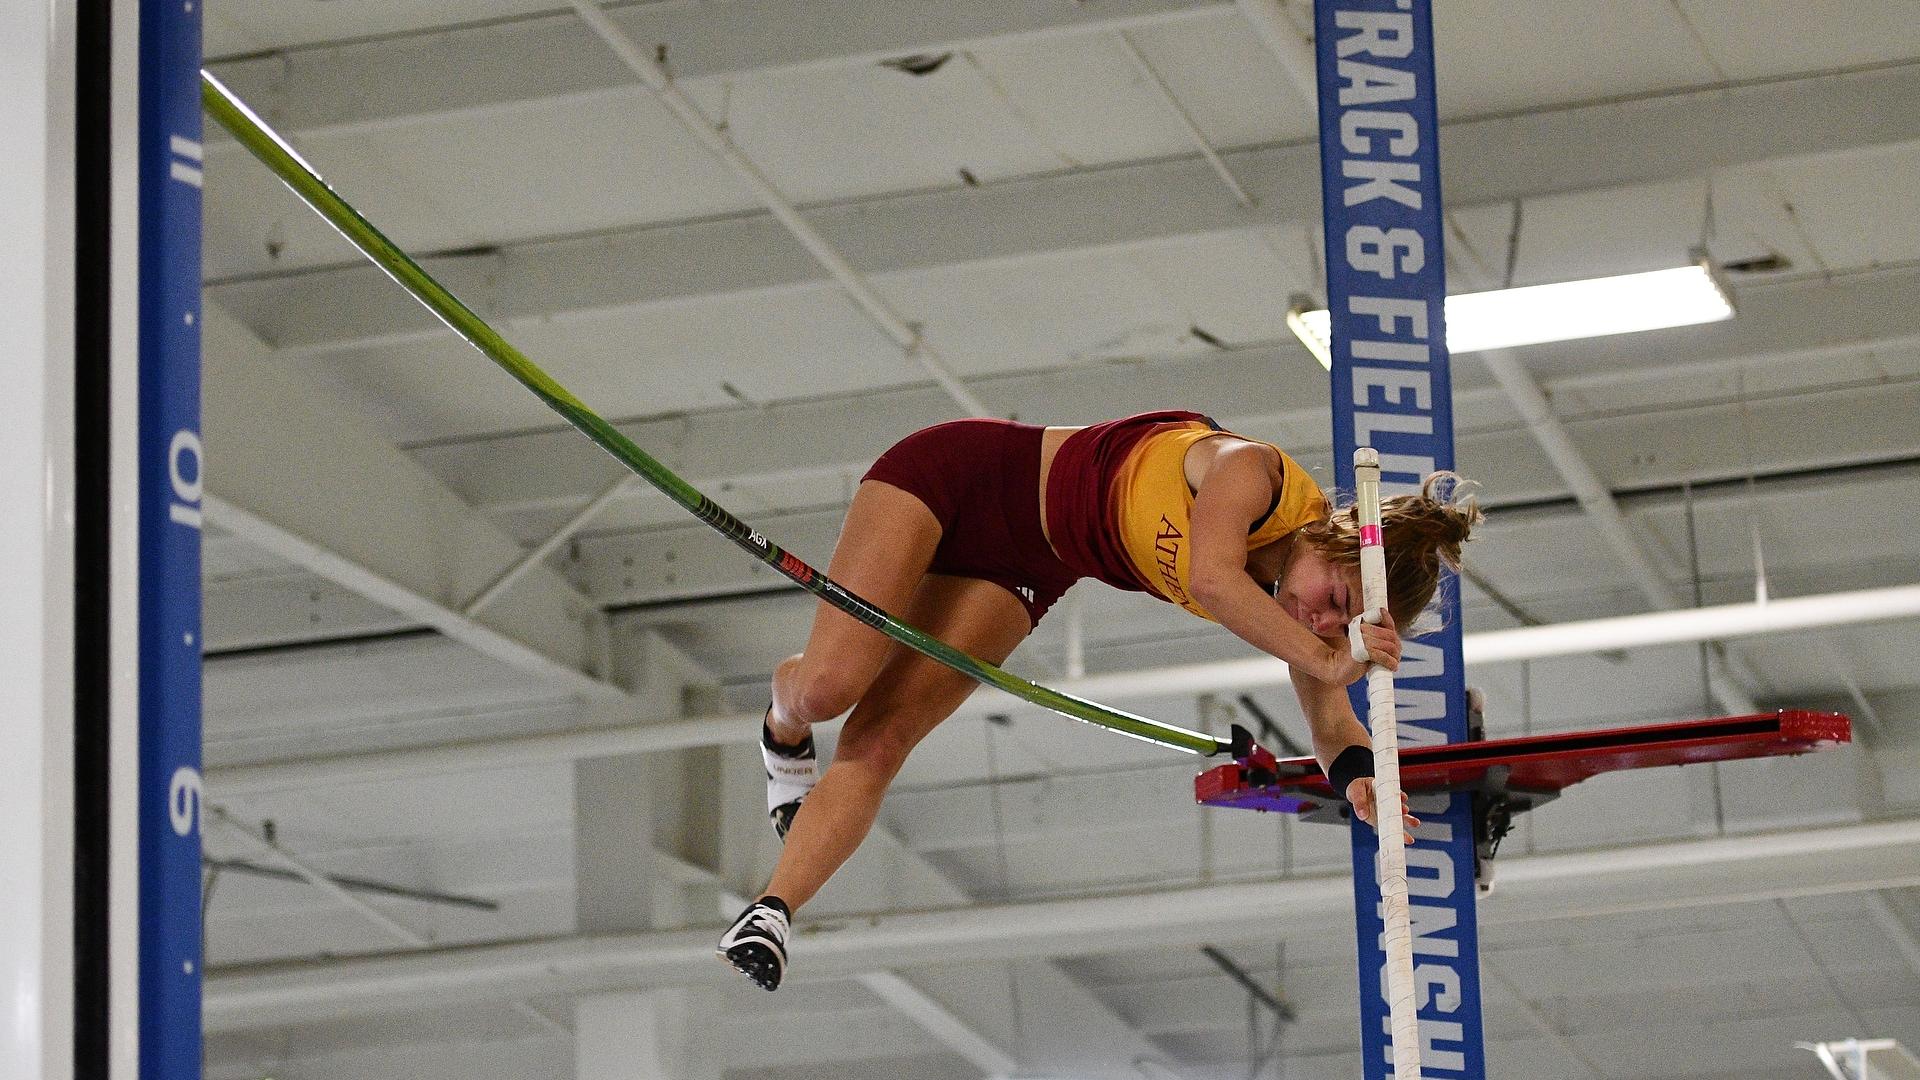 Simon will head back to nationals as the No. 3 ranked pole vaulter in the nation